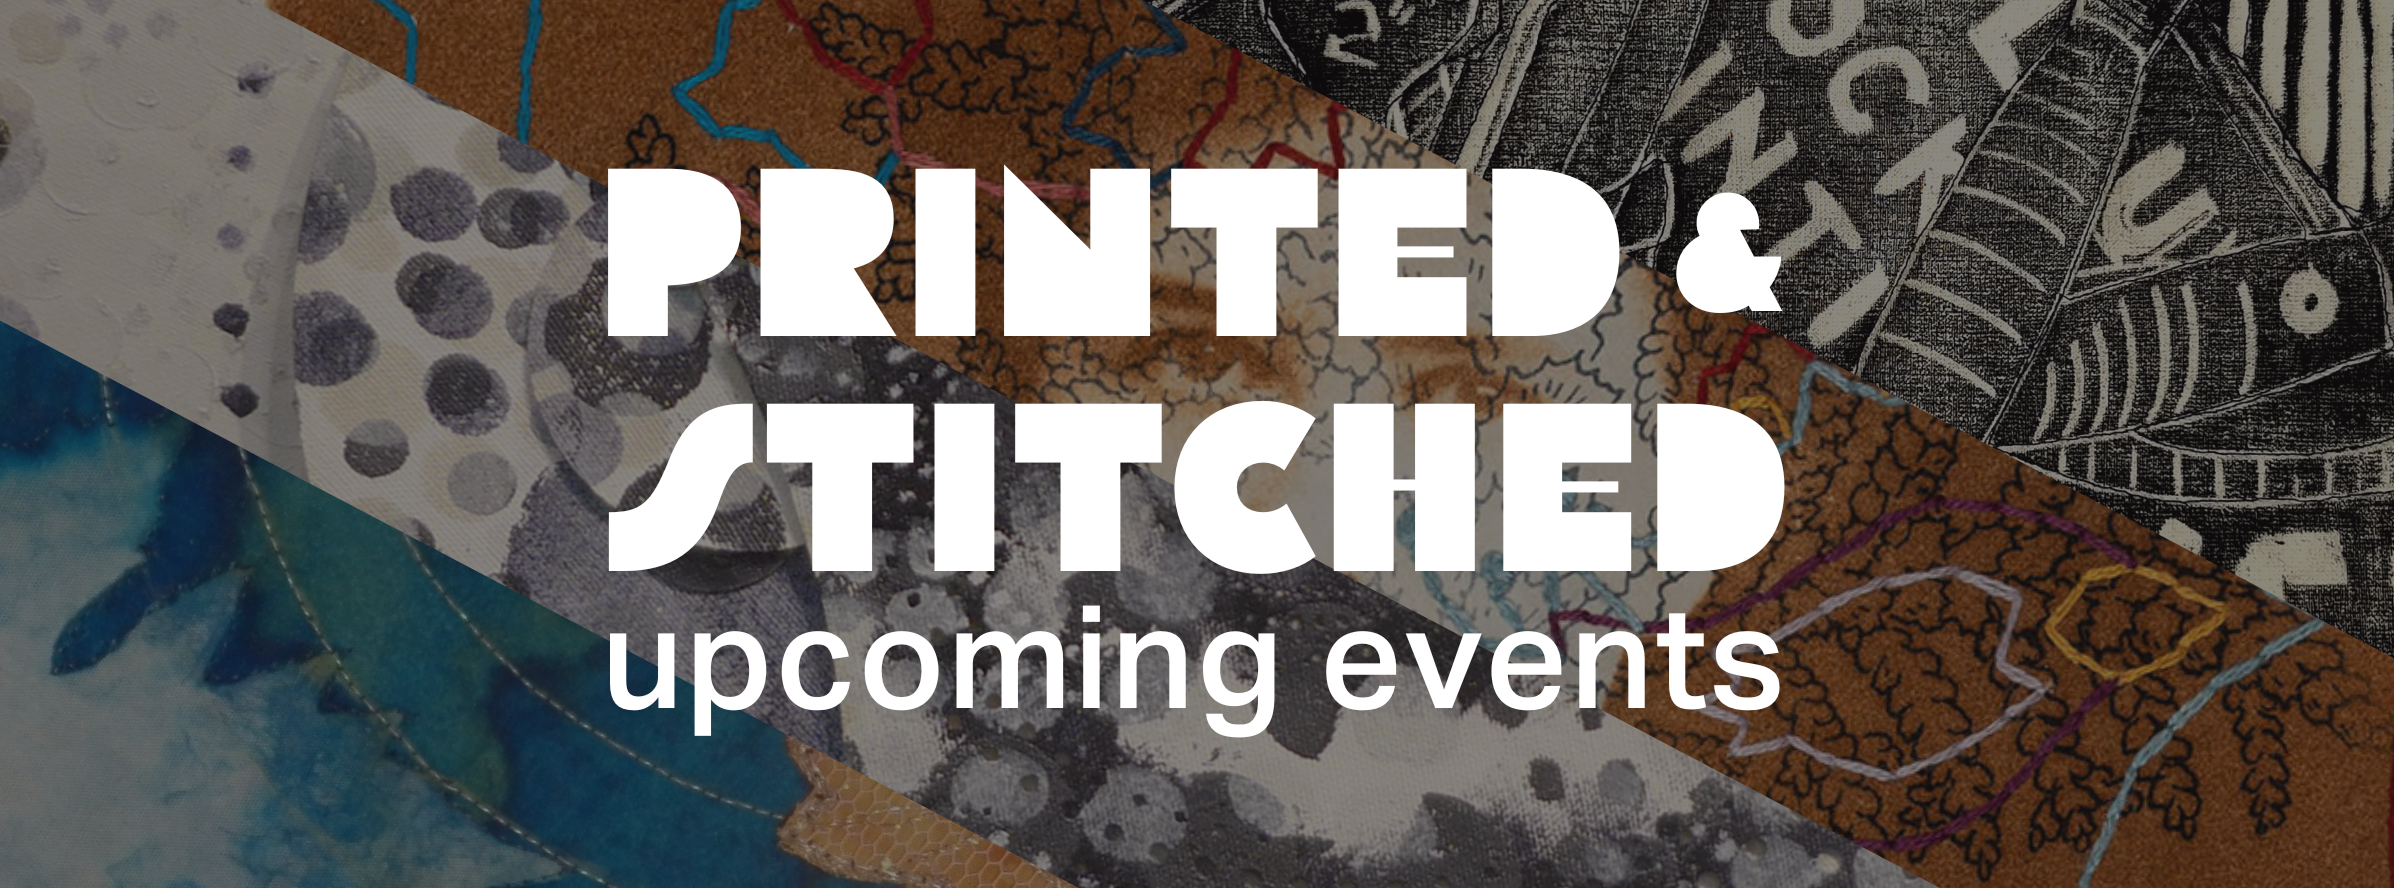 Printed and stitched upcoming events